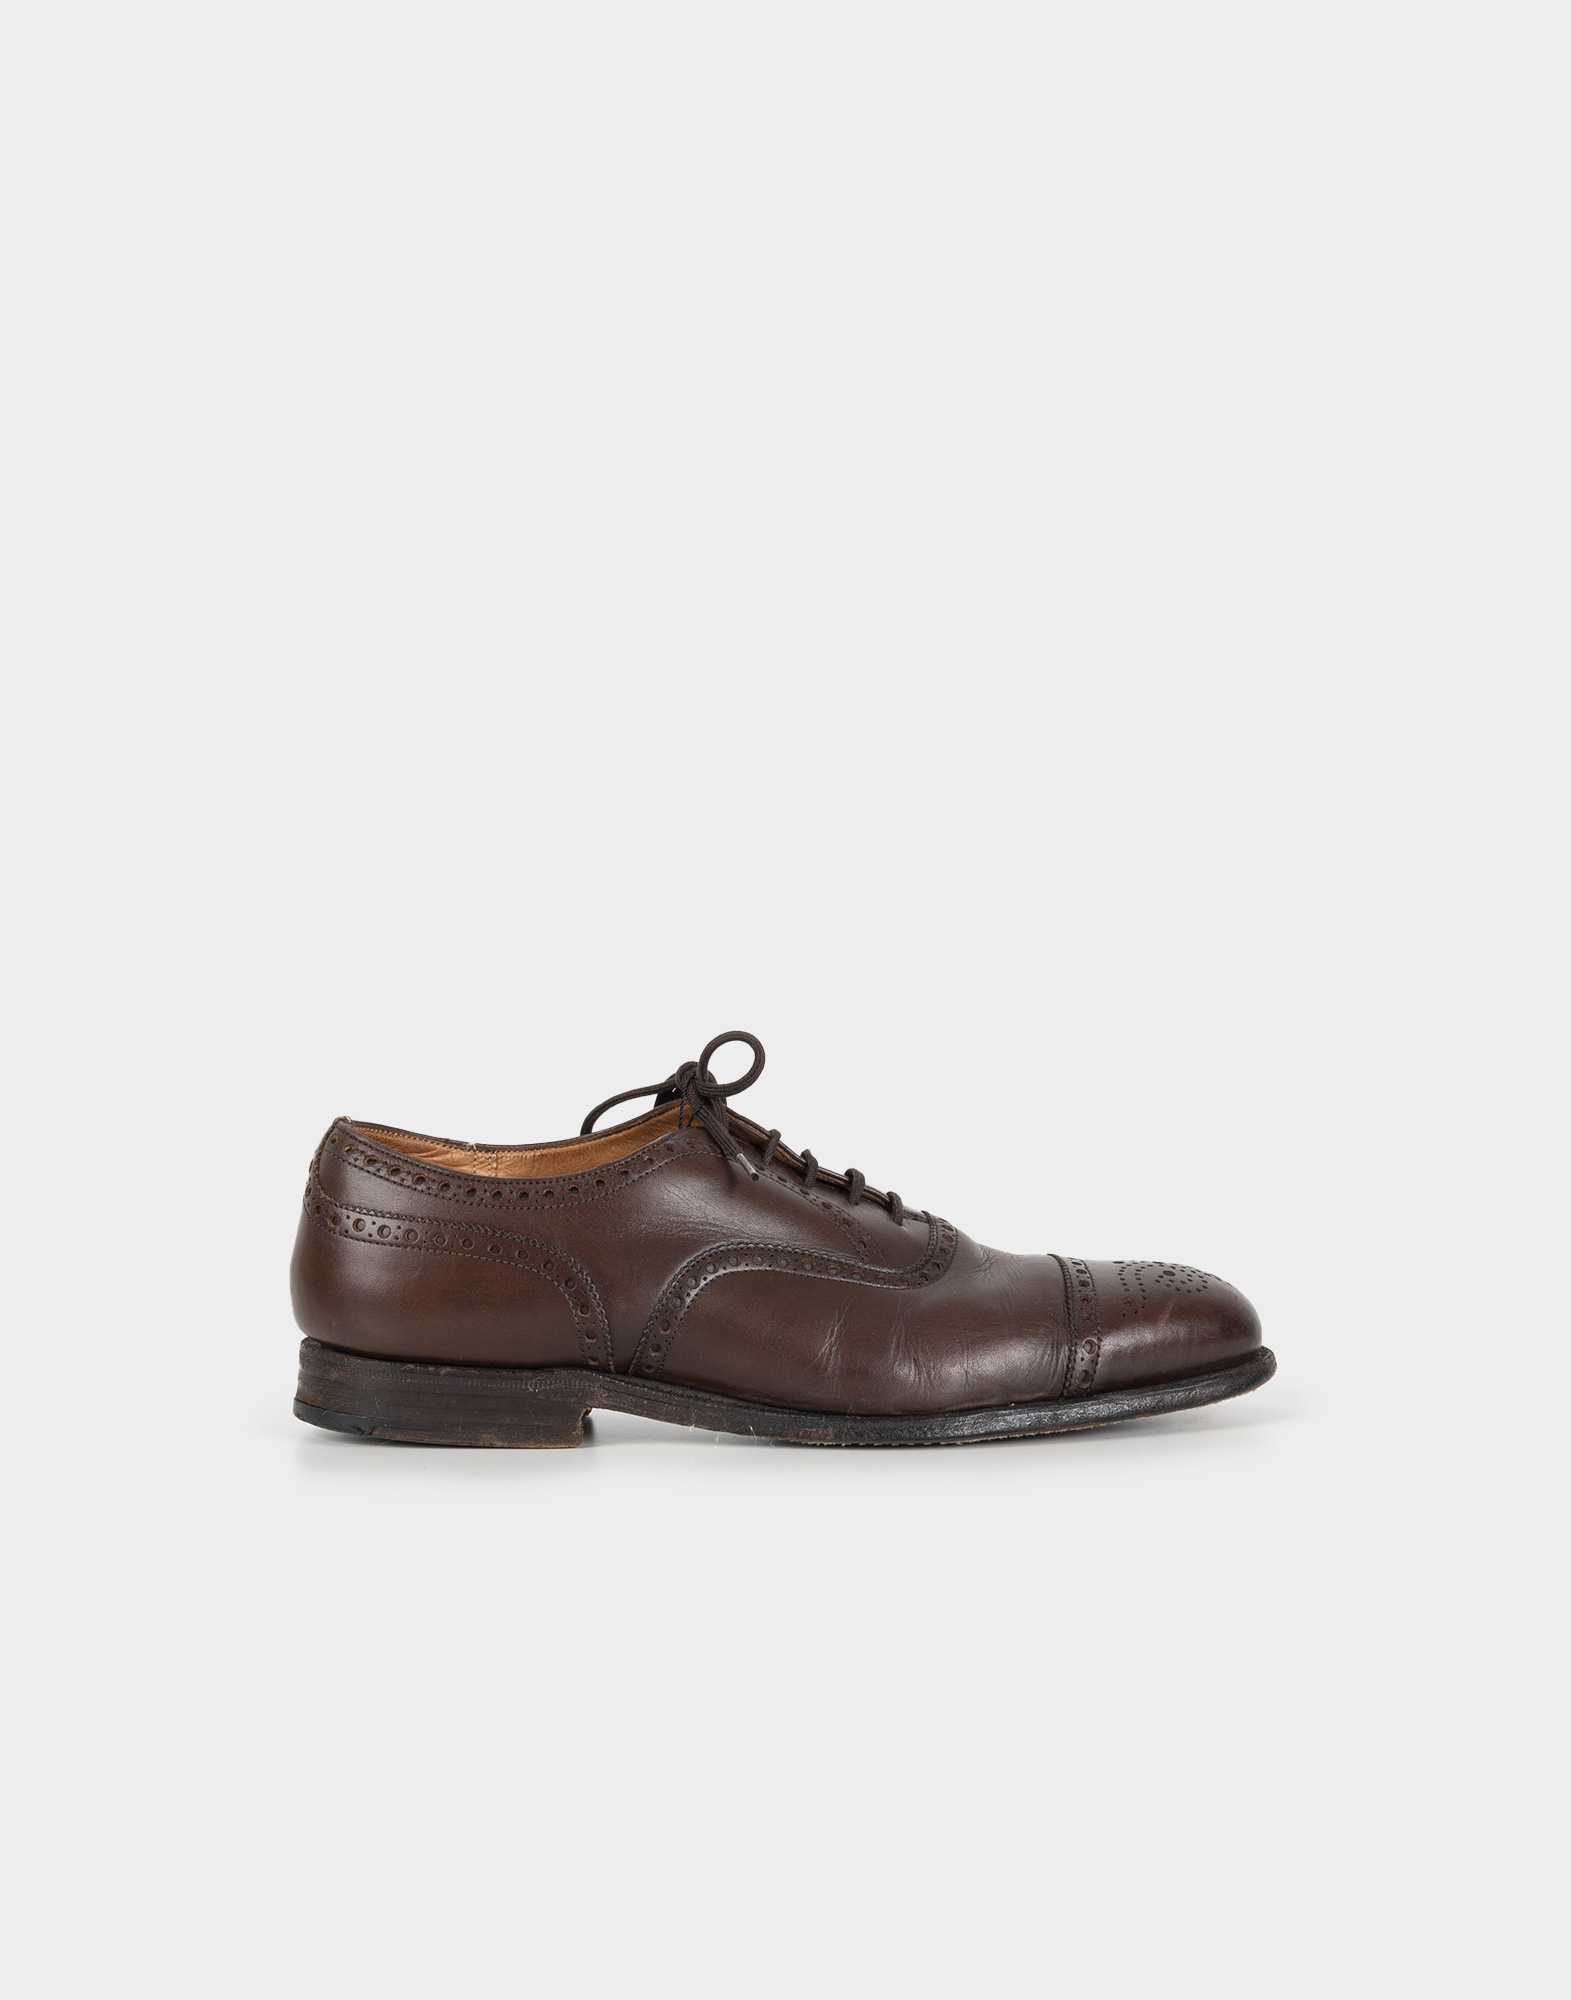 Brown leather men's shoes with laces